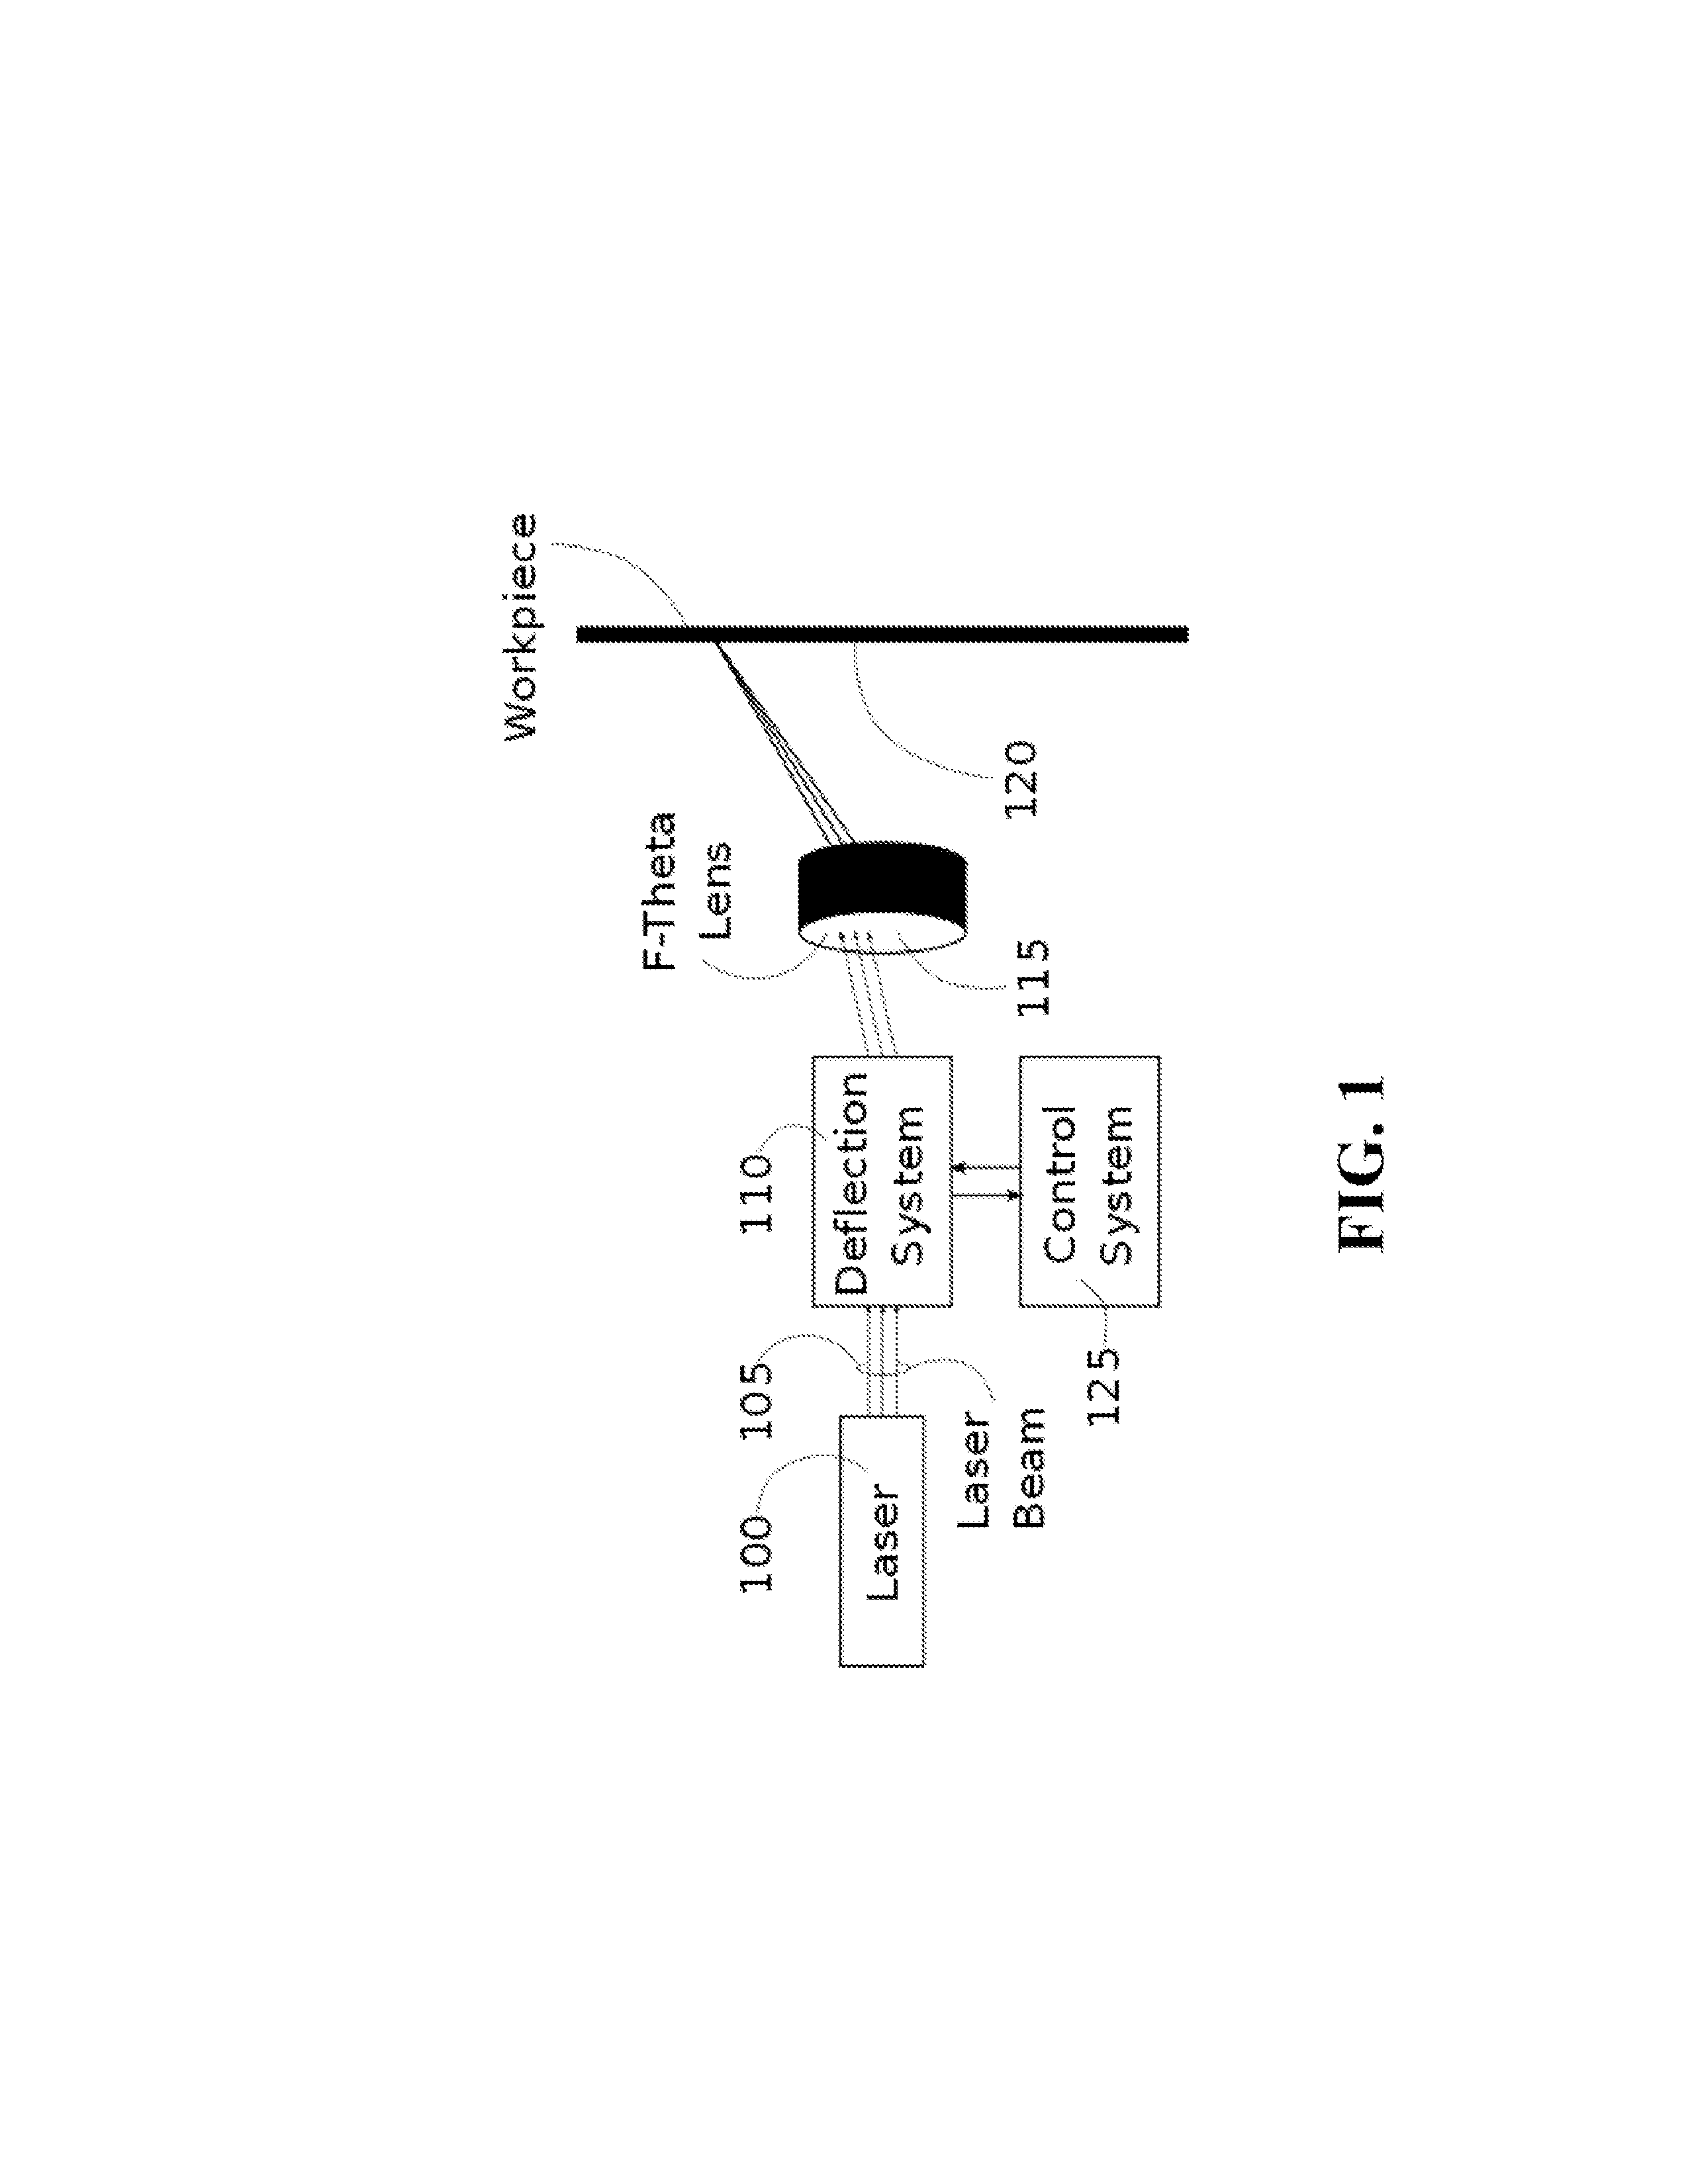 System and Method for Calibrating Laser Cutting Machines